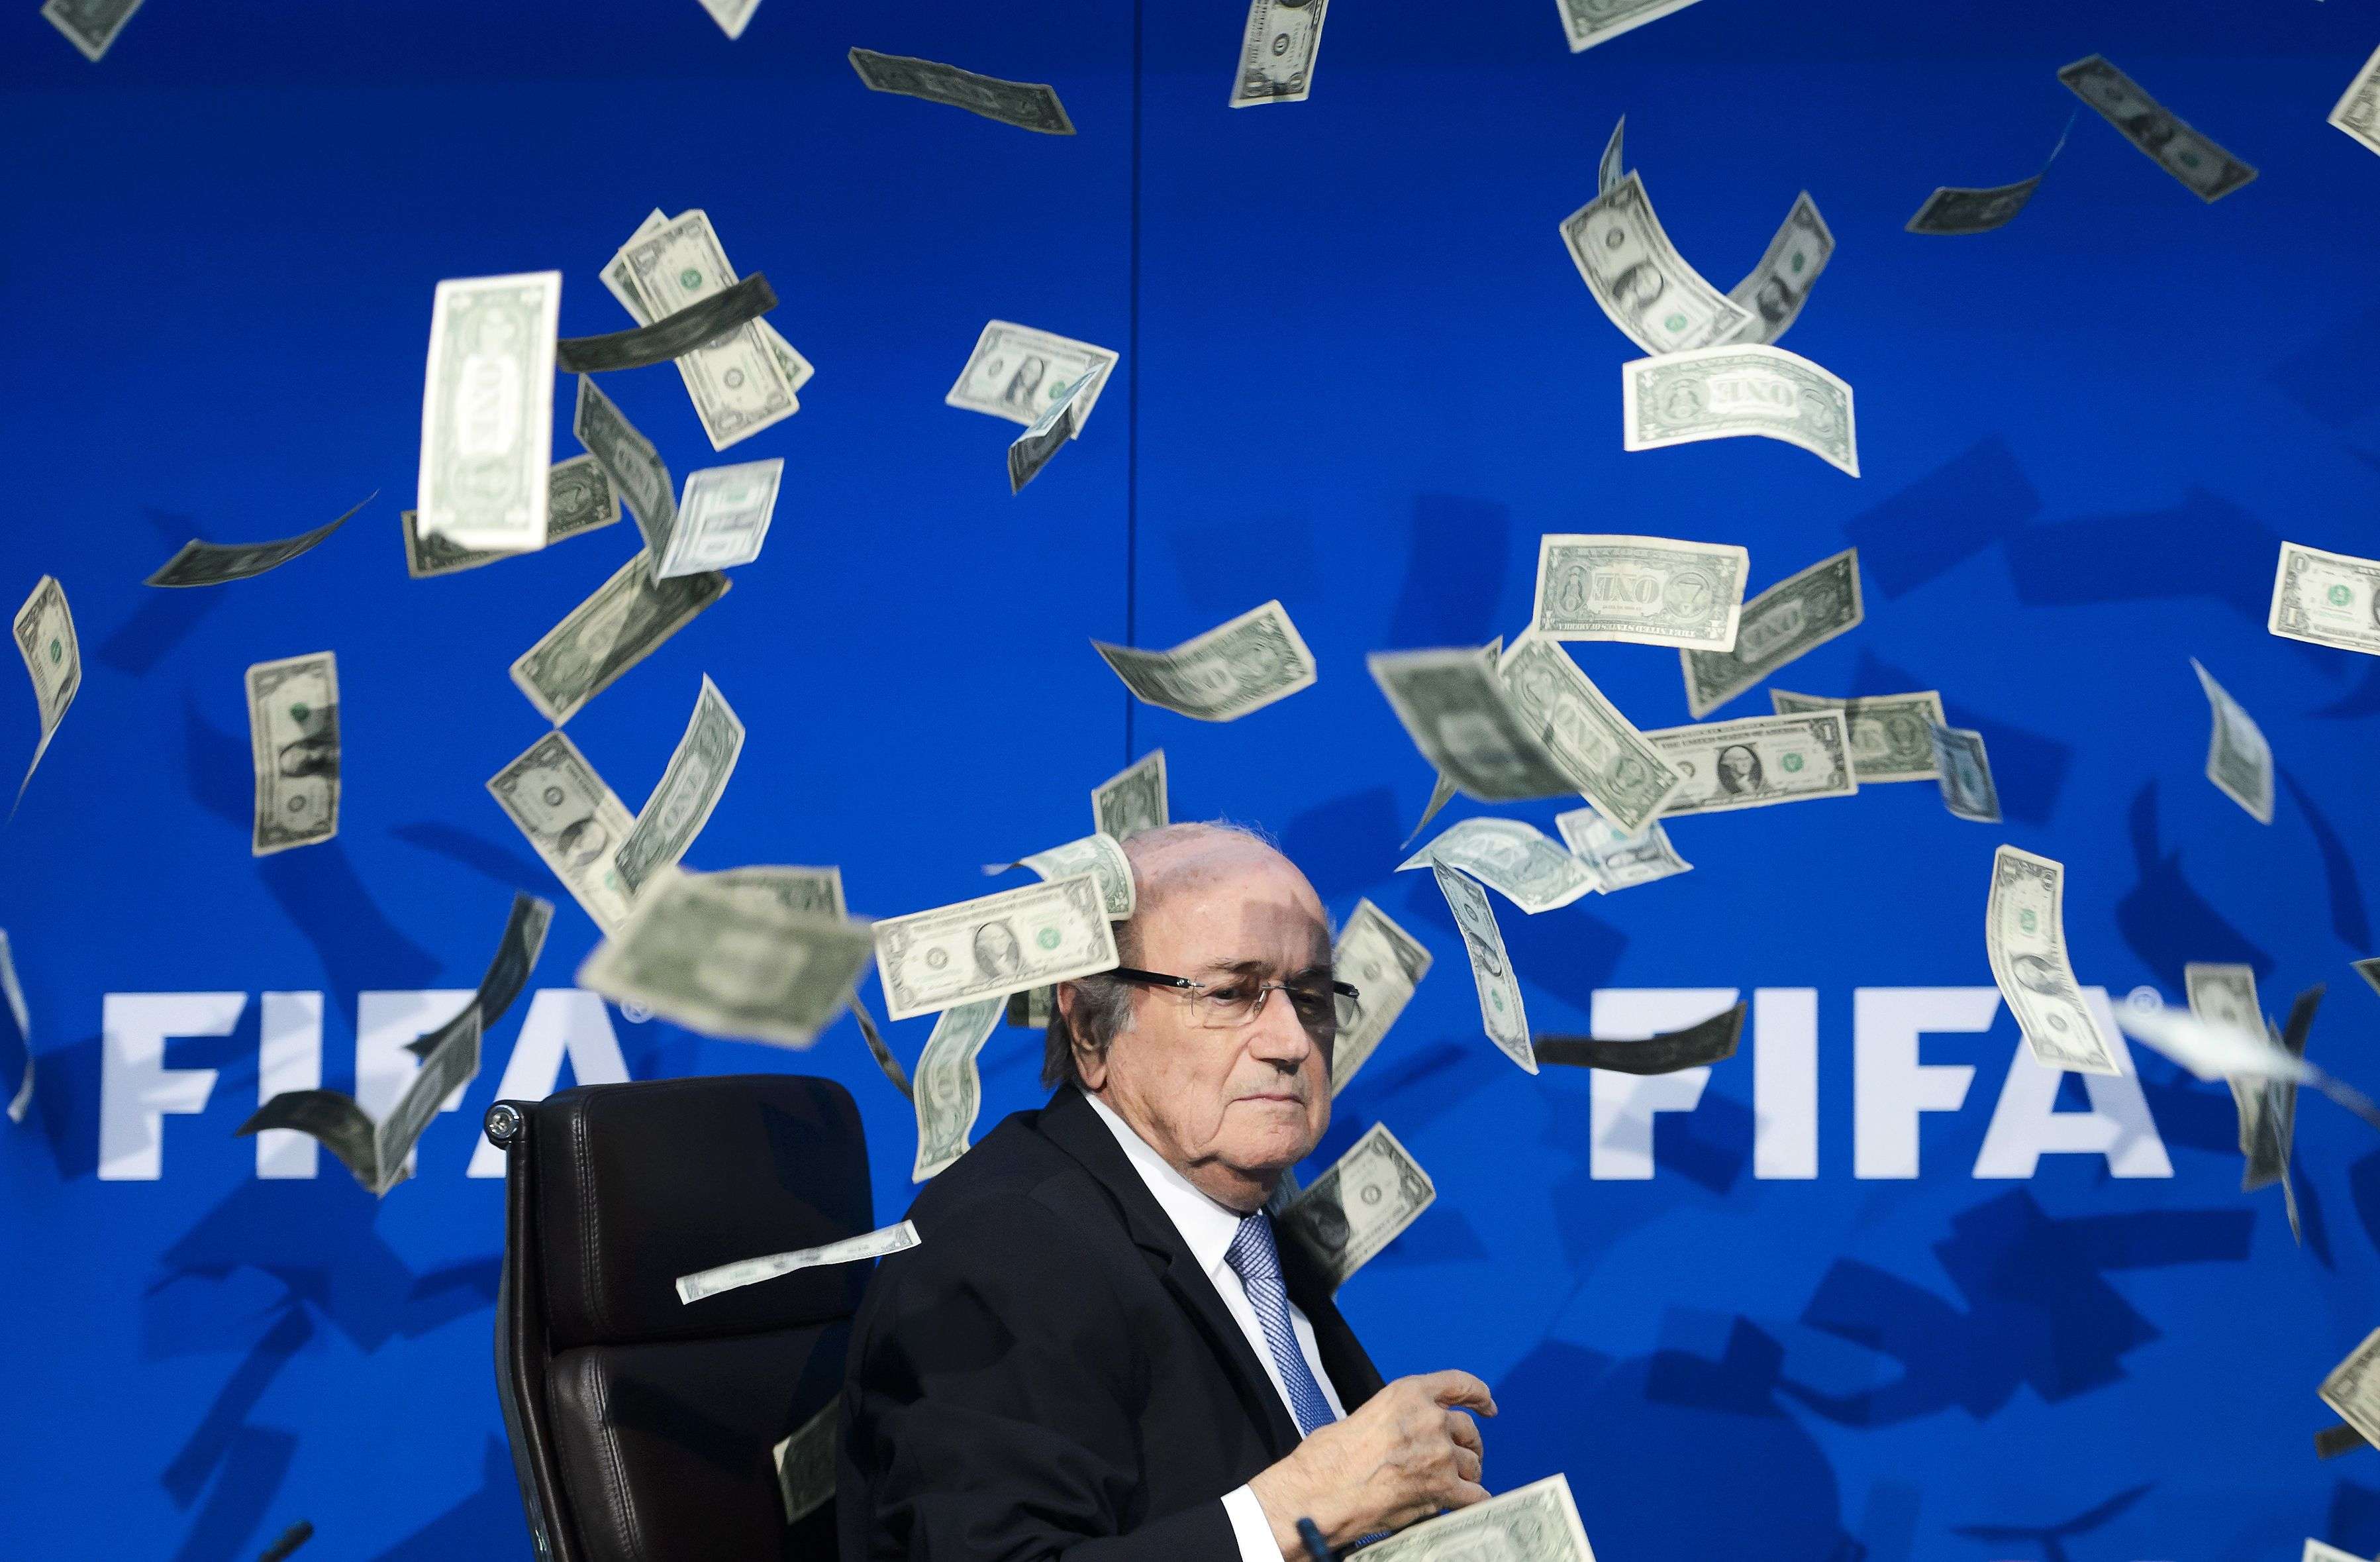 Former Fifa president Sepp Blatter is again at the forefront of allegations he abused his position of power. Photo: AFP